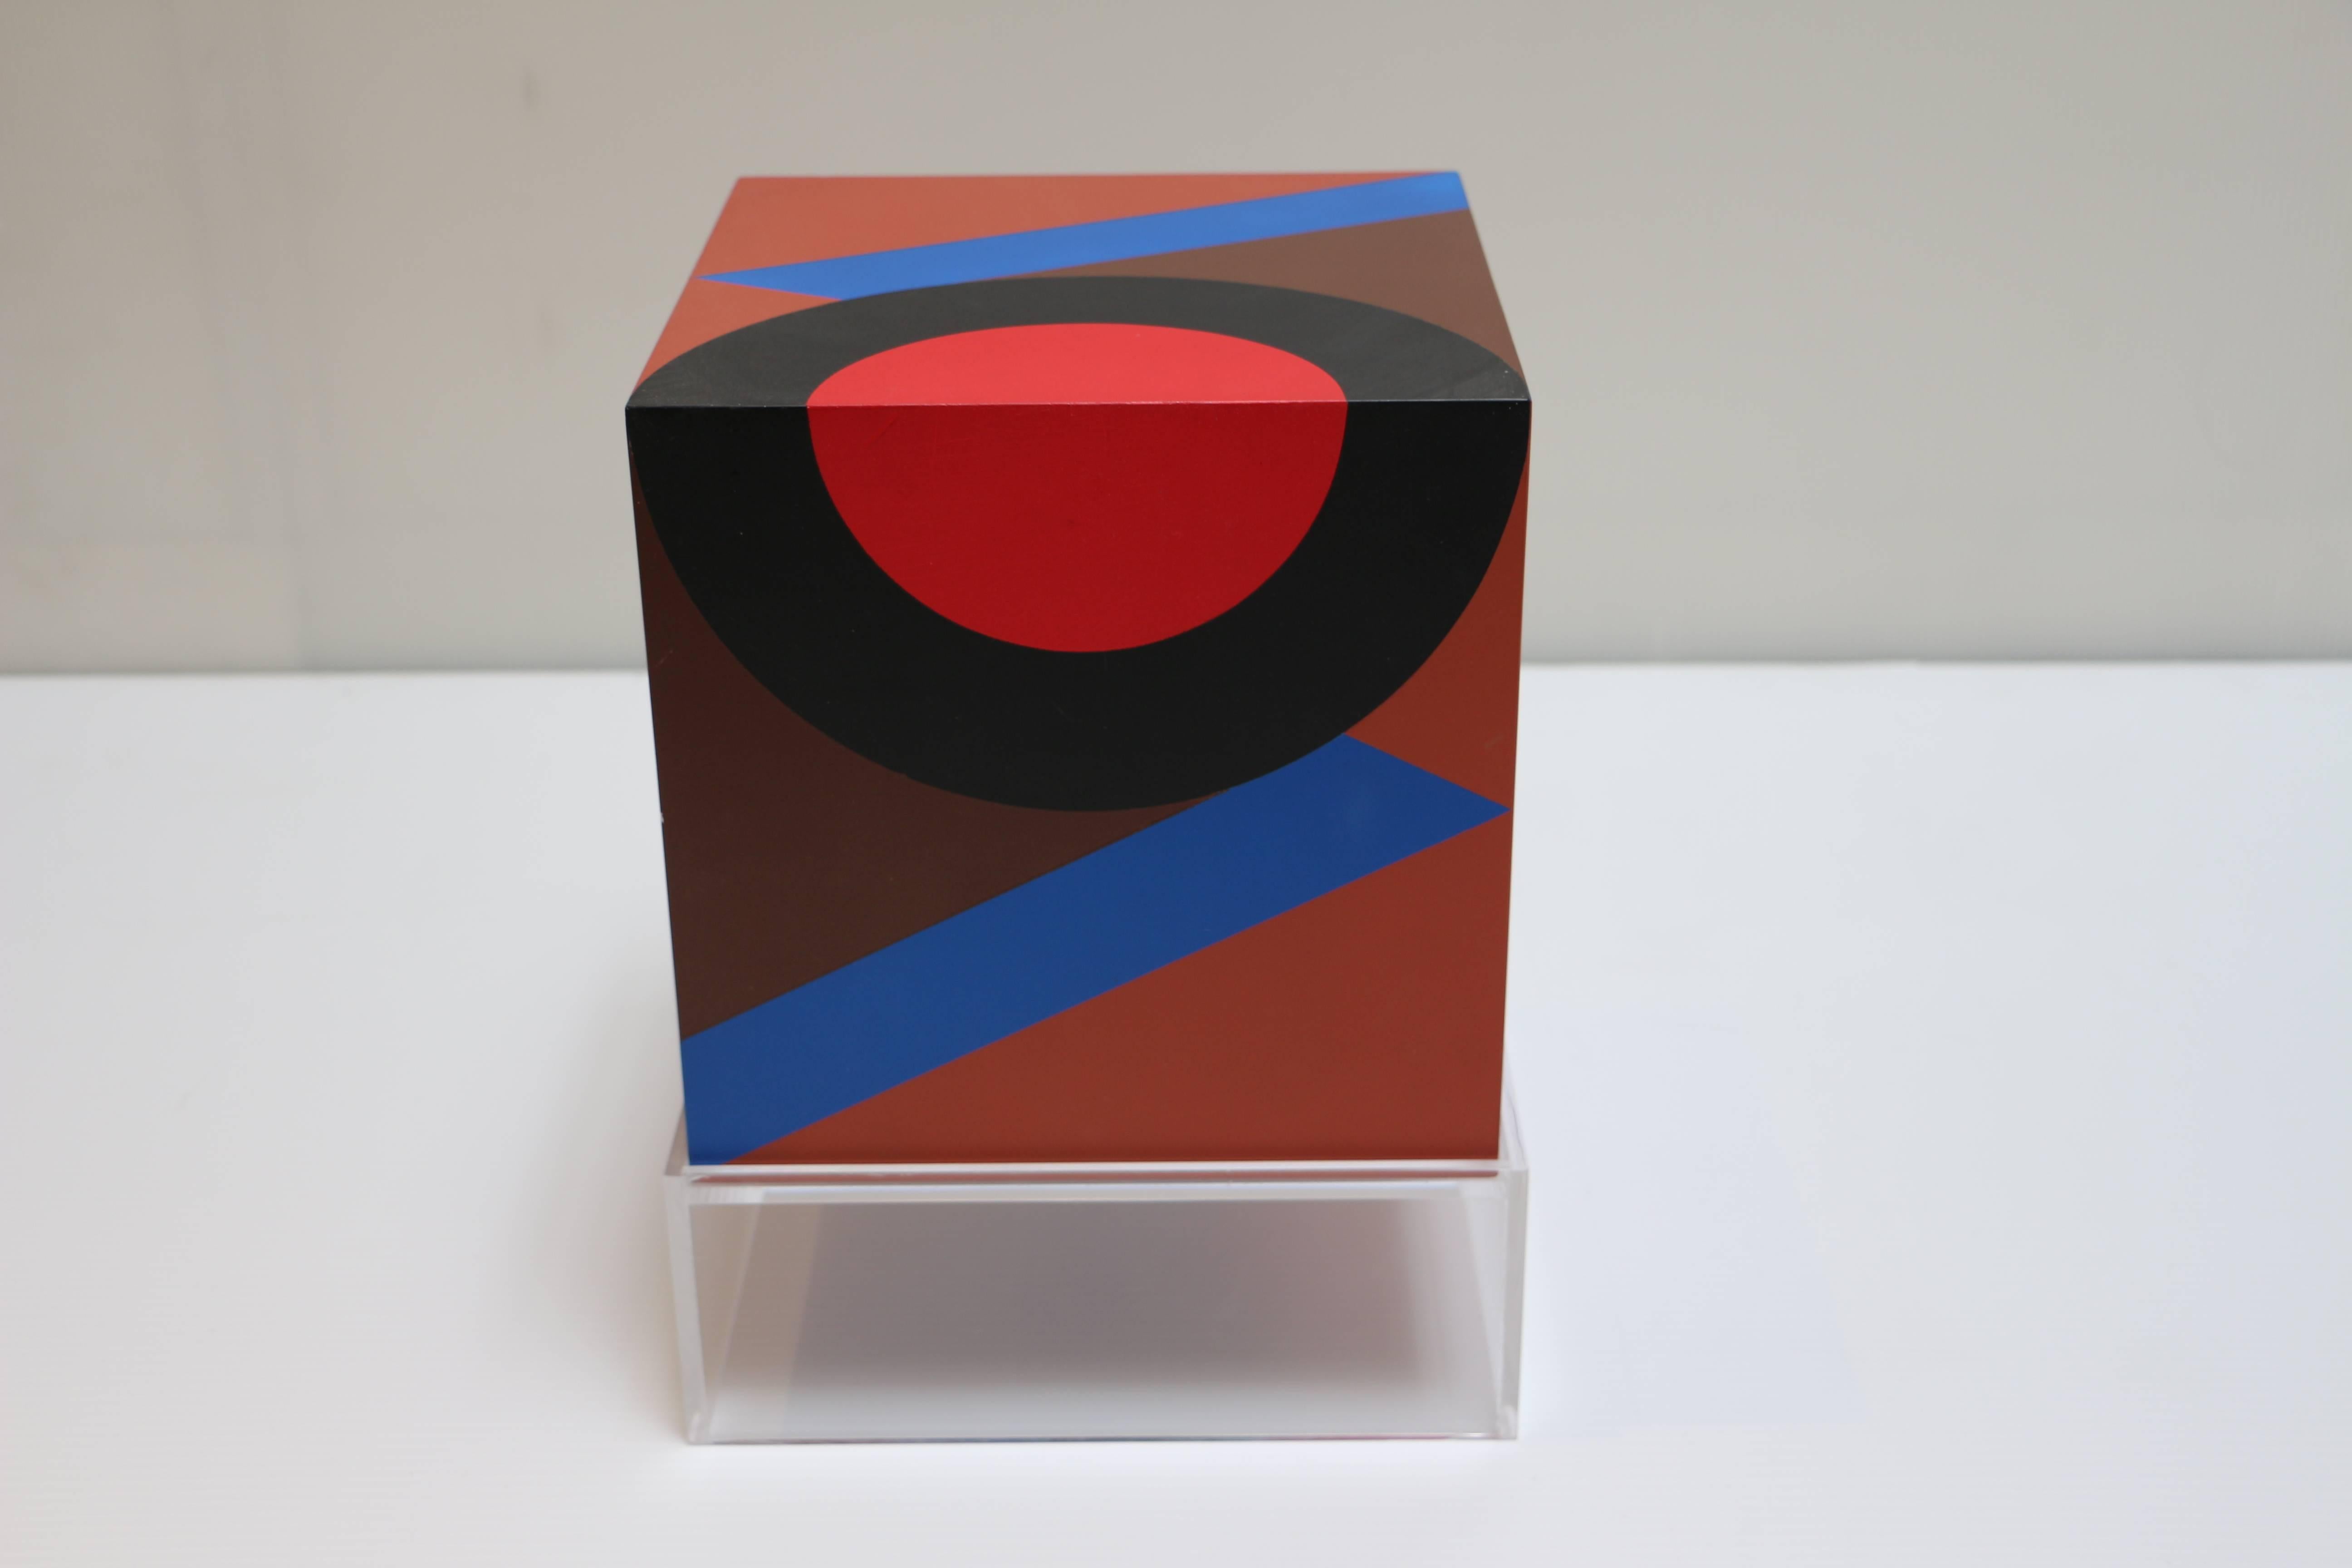 This original artwork by Karl Benjamin (1925–2012) is comprised of a wood cube structure with oil paintings on fives surfaces. 

Benjamin was known for filling his prints with orchestrated colors, and for his sensitivity to the union of form and